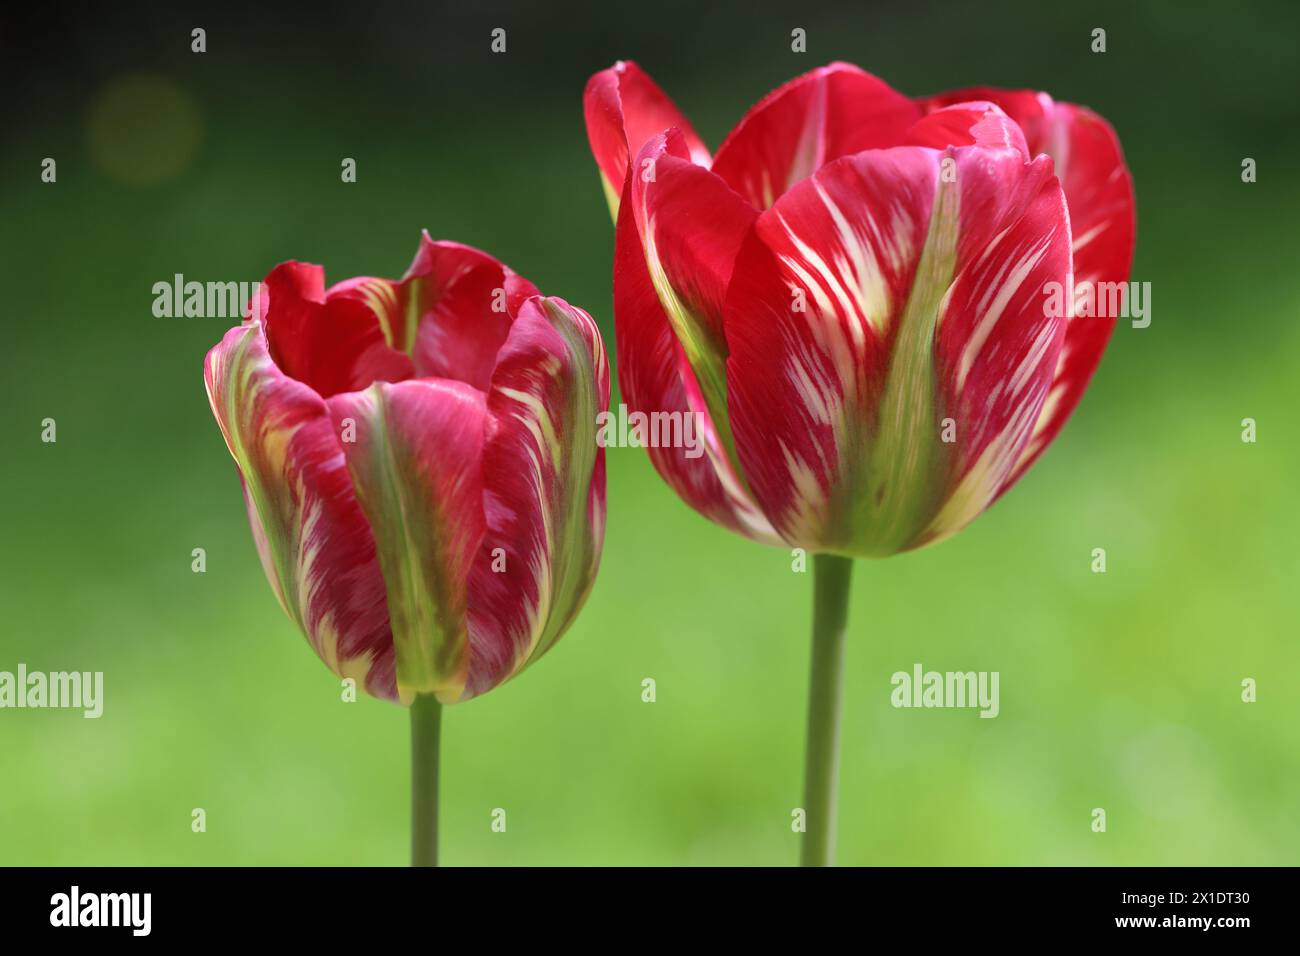 close-up of two beautiful viridiflora tulips against a green blurred background with selective focus Stock Photo